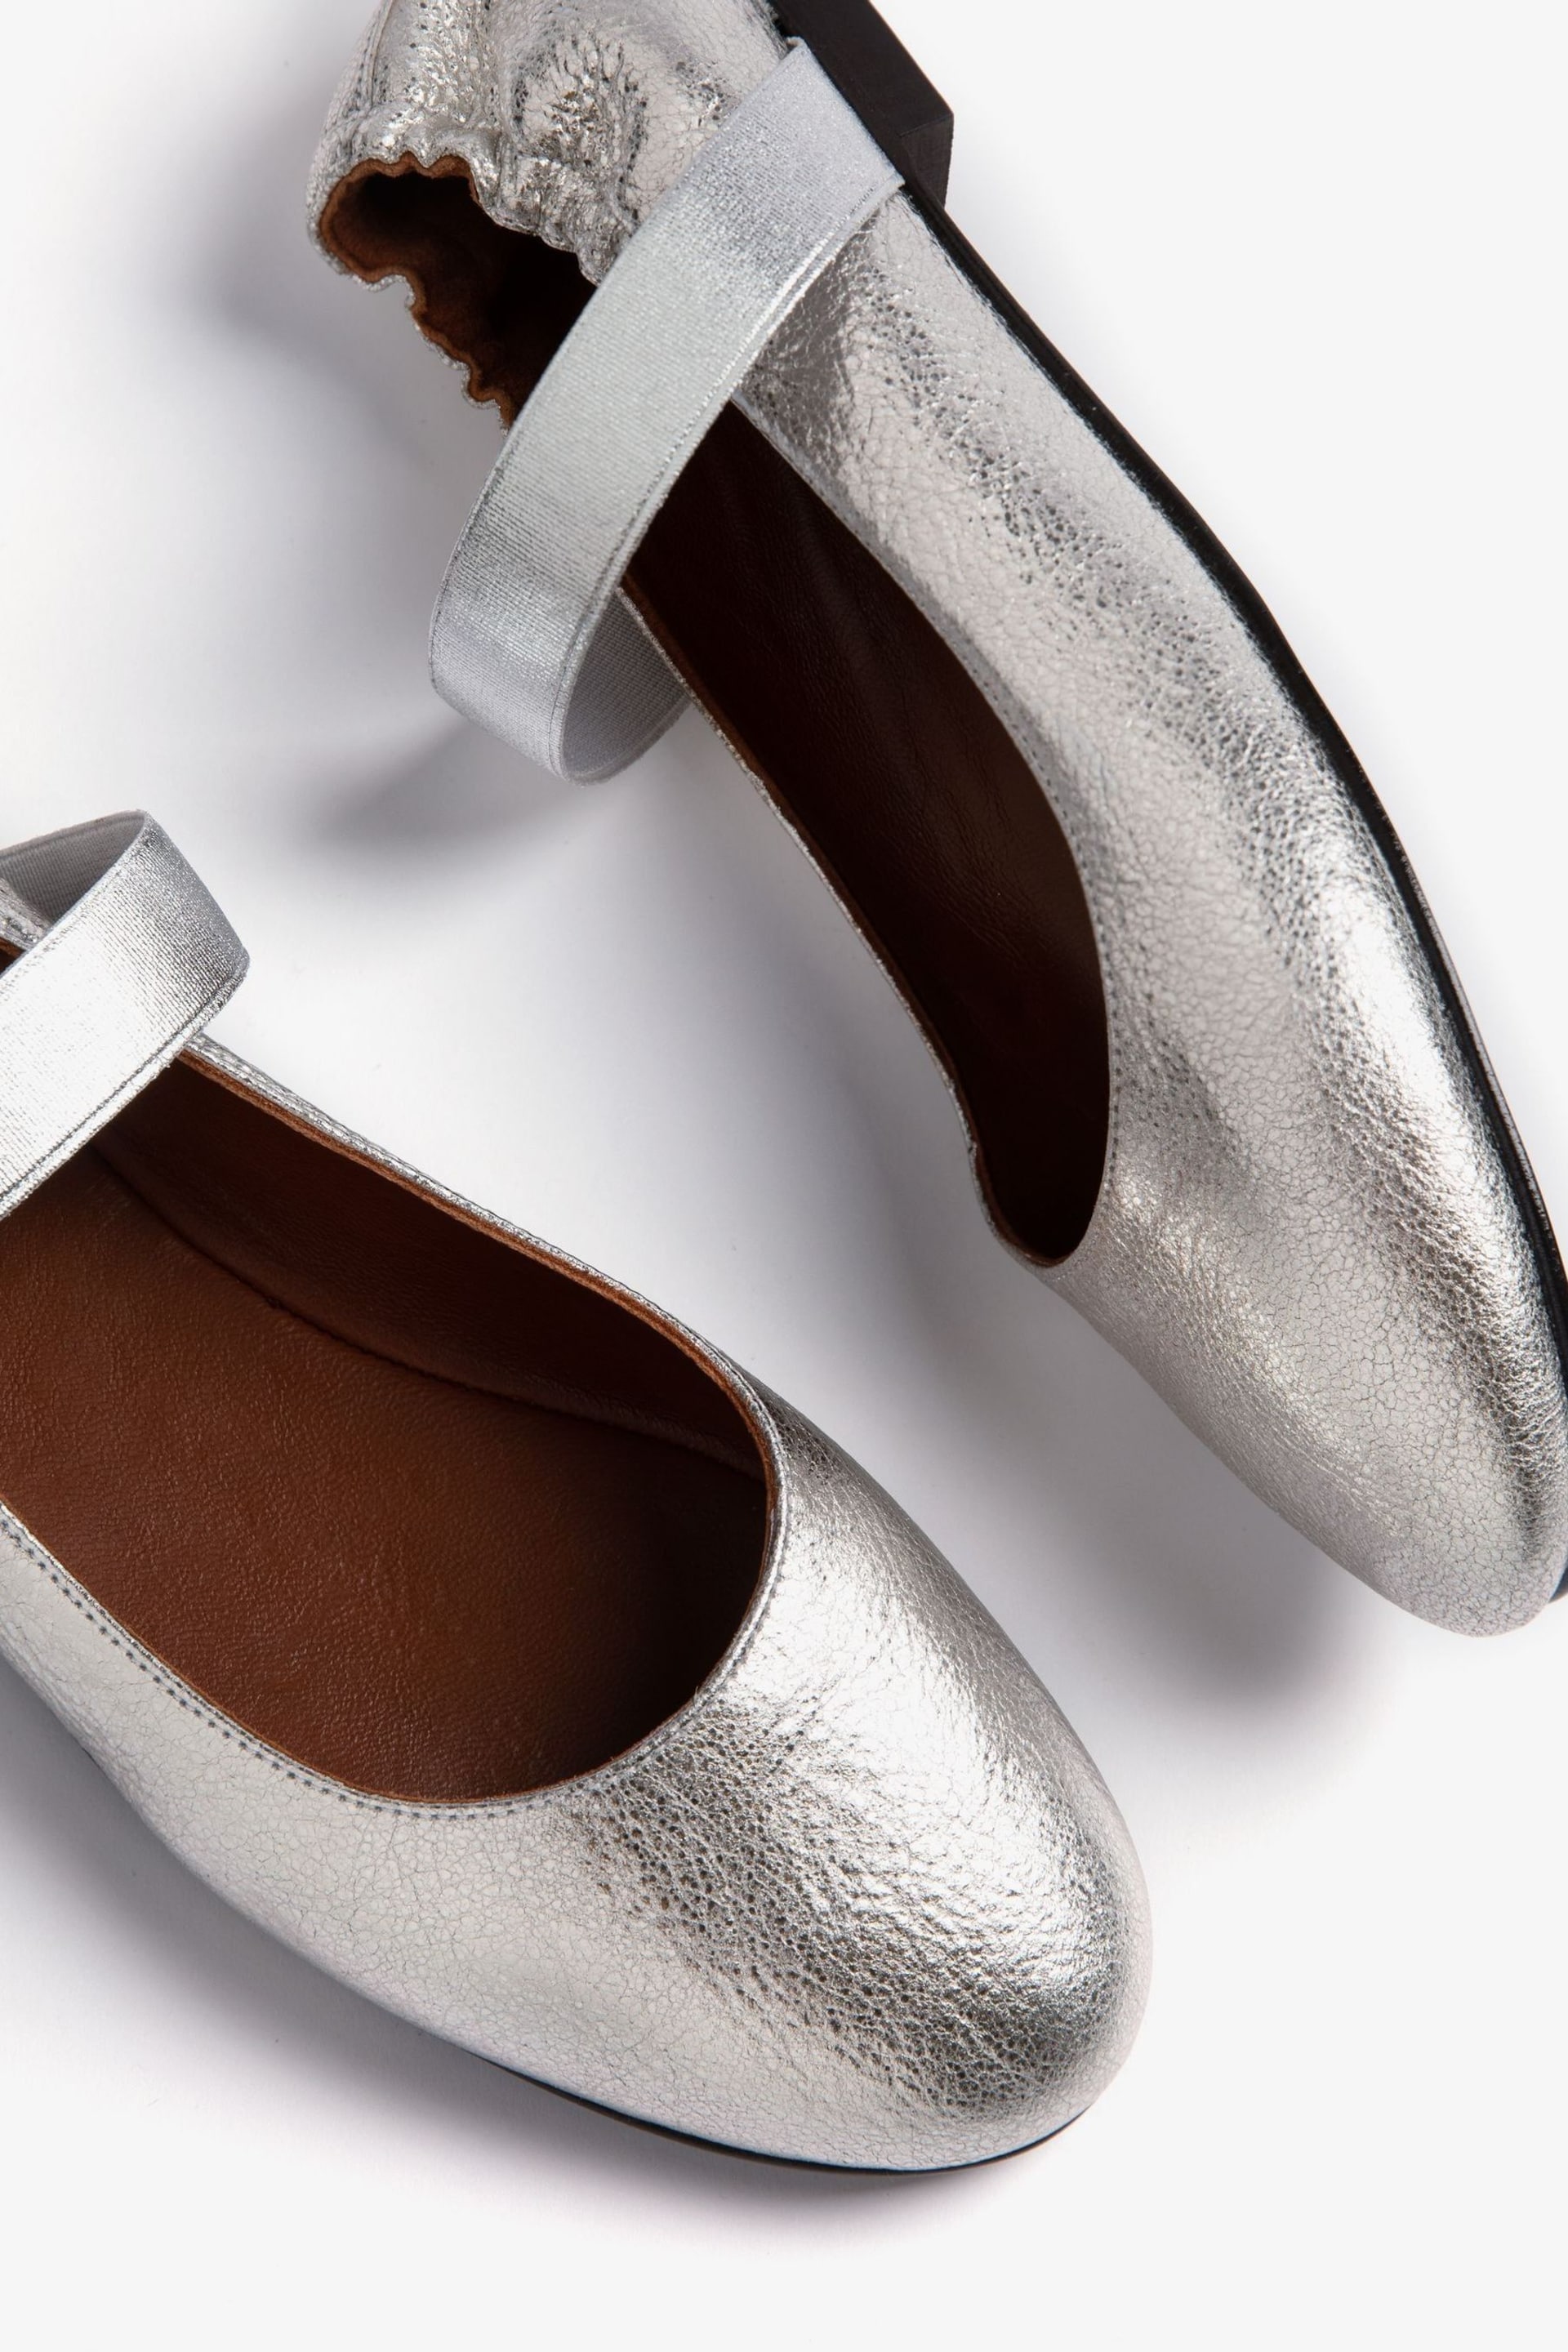 Penelope Chilvers Silver Rock And Roll Leather Shoes - Image 5 of 6